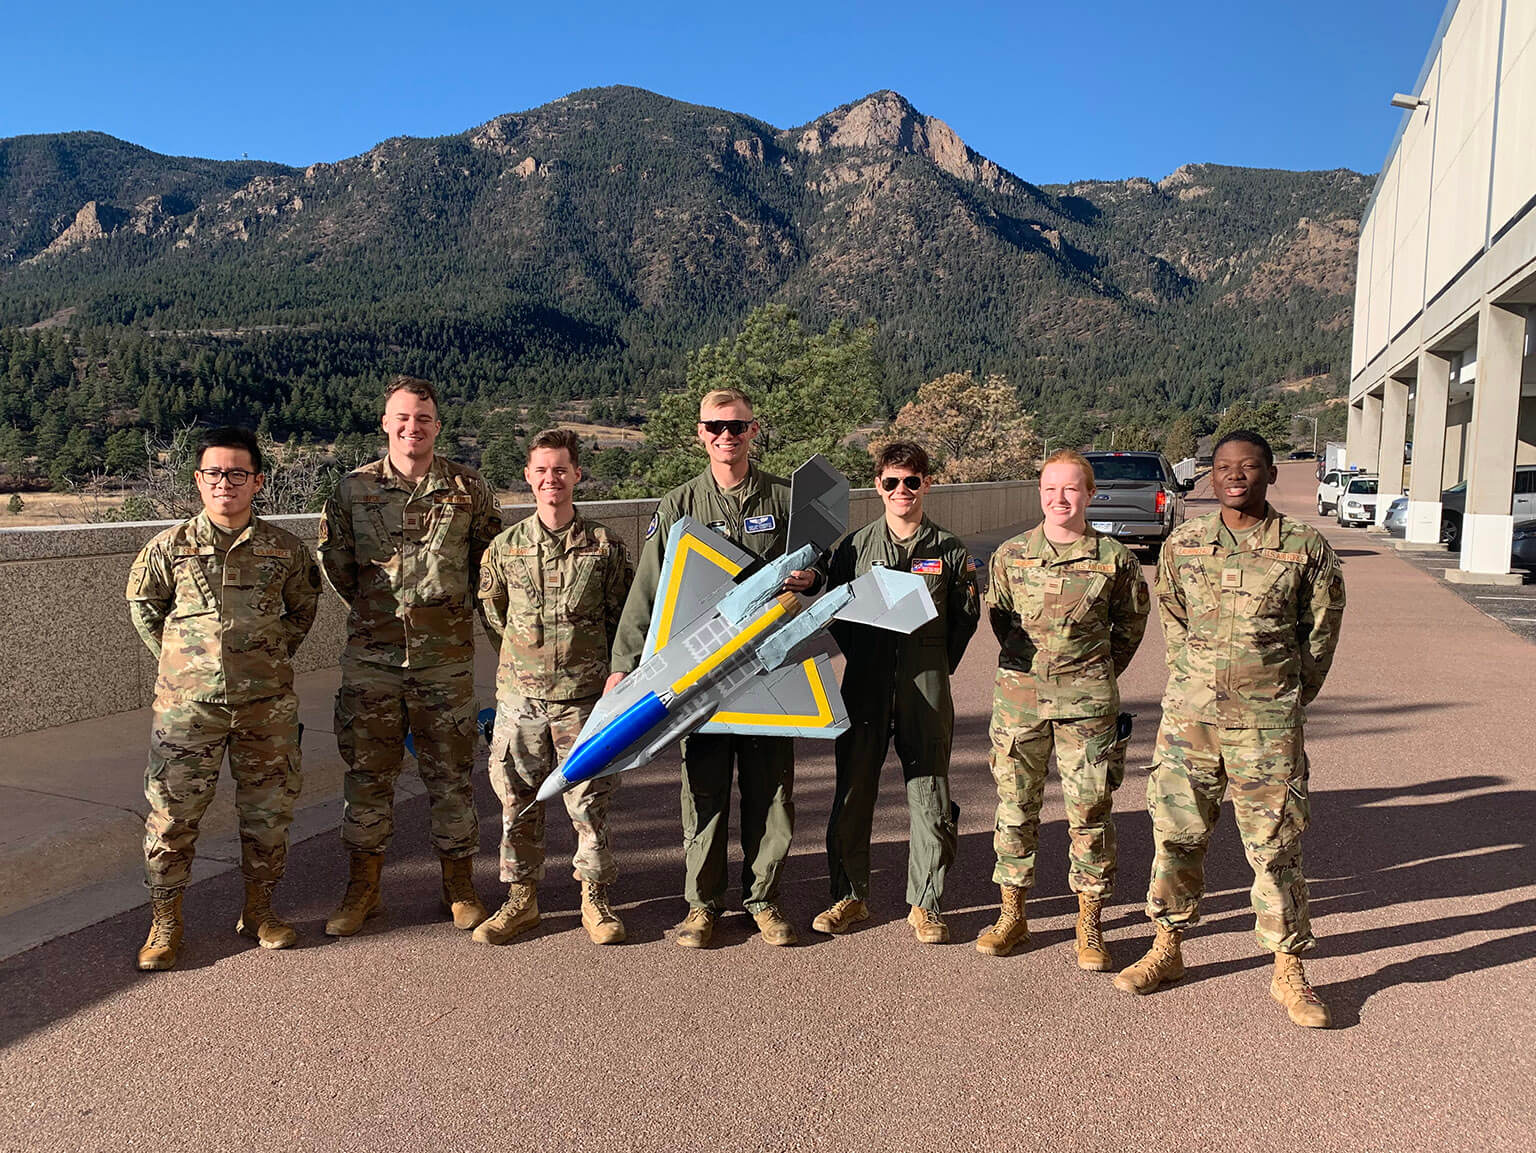 Cadets 1st Class Bryce Helmer (from left), Kevin Sanchez, Sam Widman, Nathan Uhl and Stephen Zanowic pose with their team’s flying model of their large stealthy target drone 